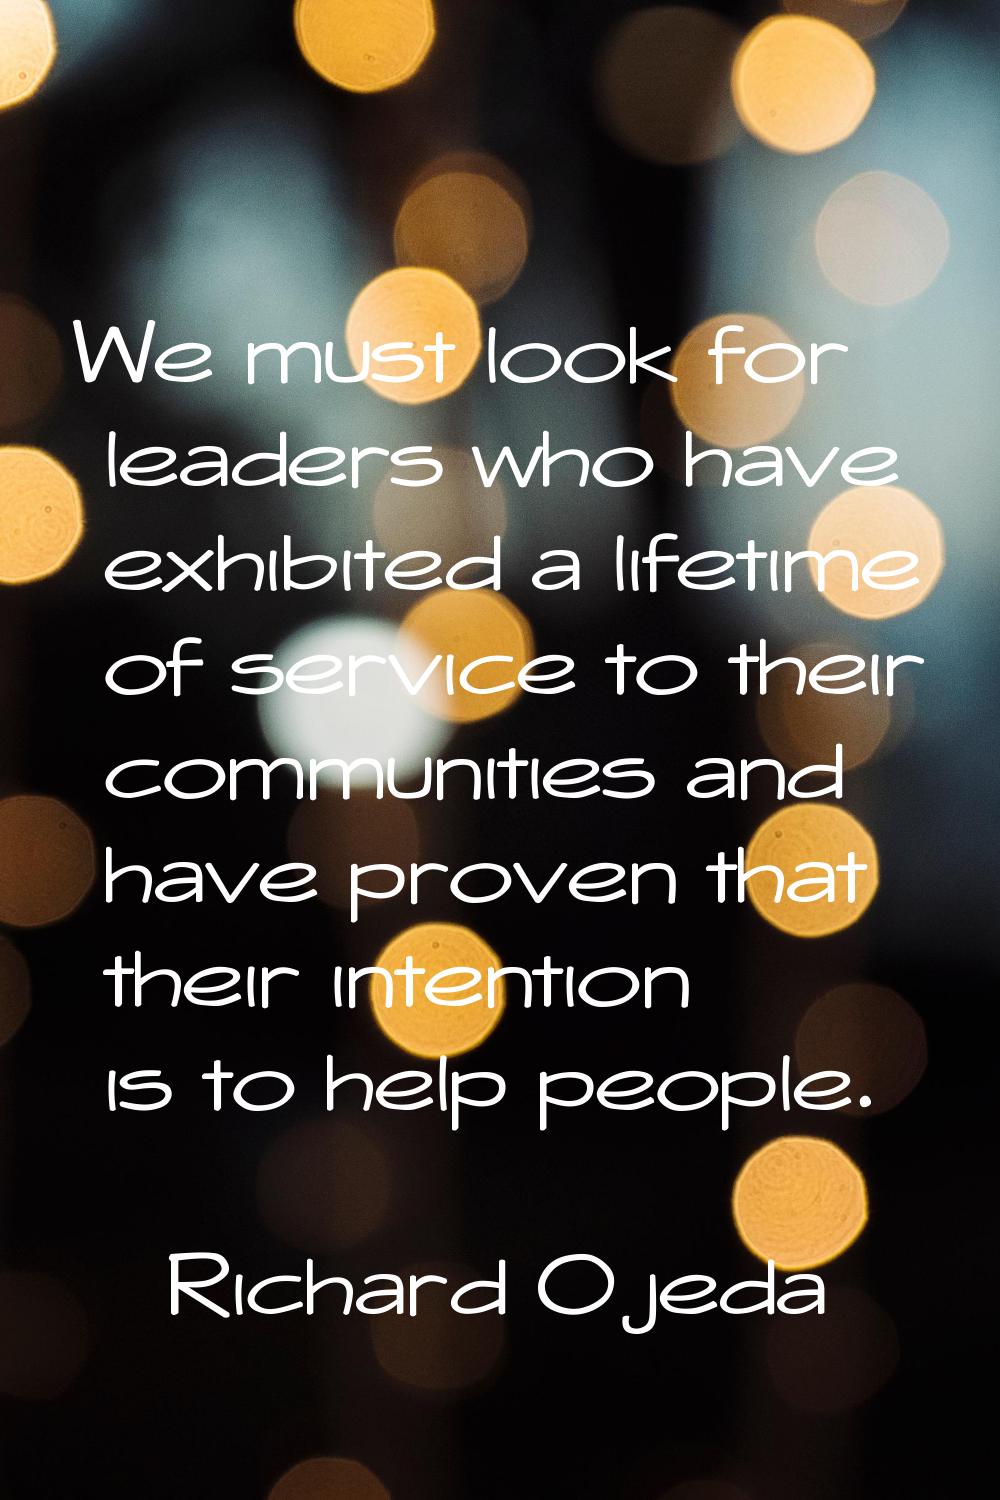 We must look for leaders who have exhibited a lifetime of service to their communities and have pro